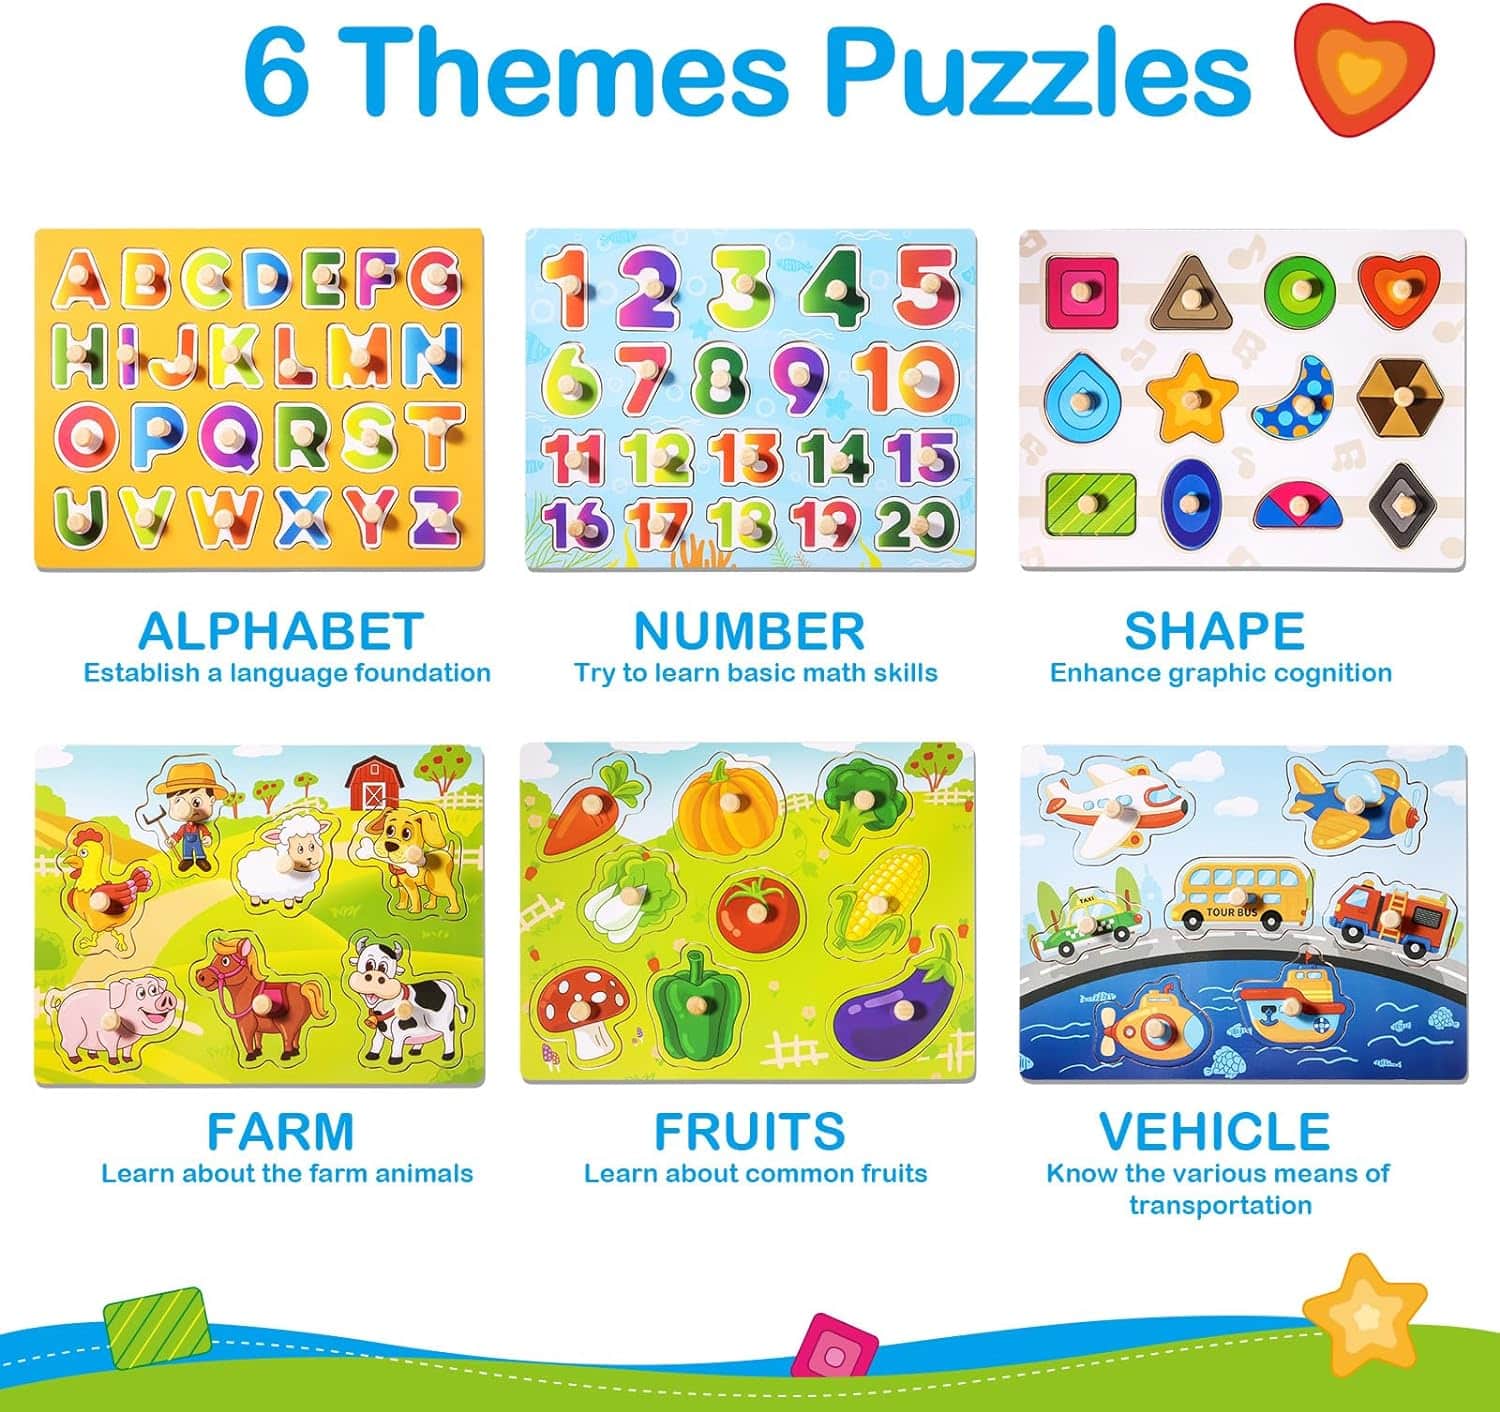 Wooden Puzzles for Toddlers 1-3: A Fun and Educational Toy Review